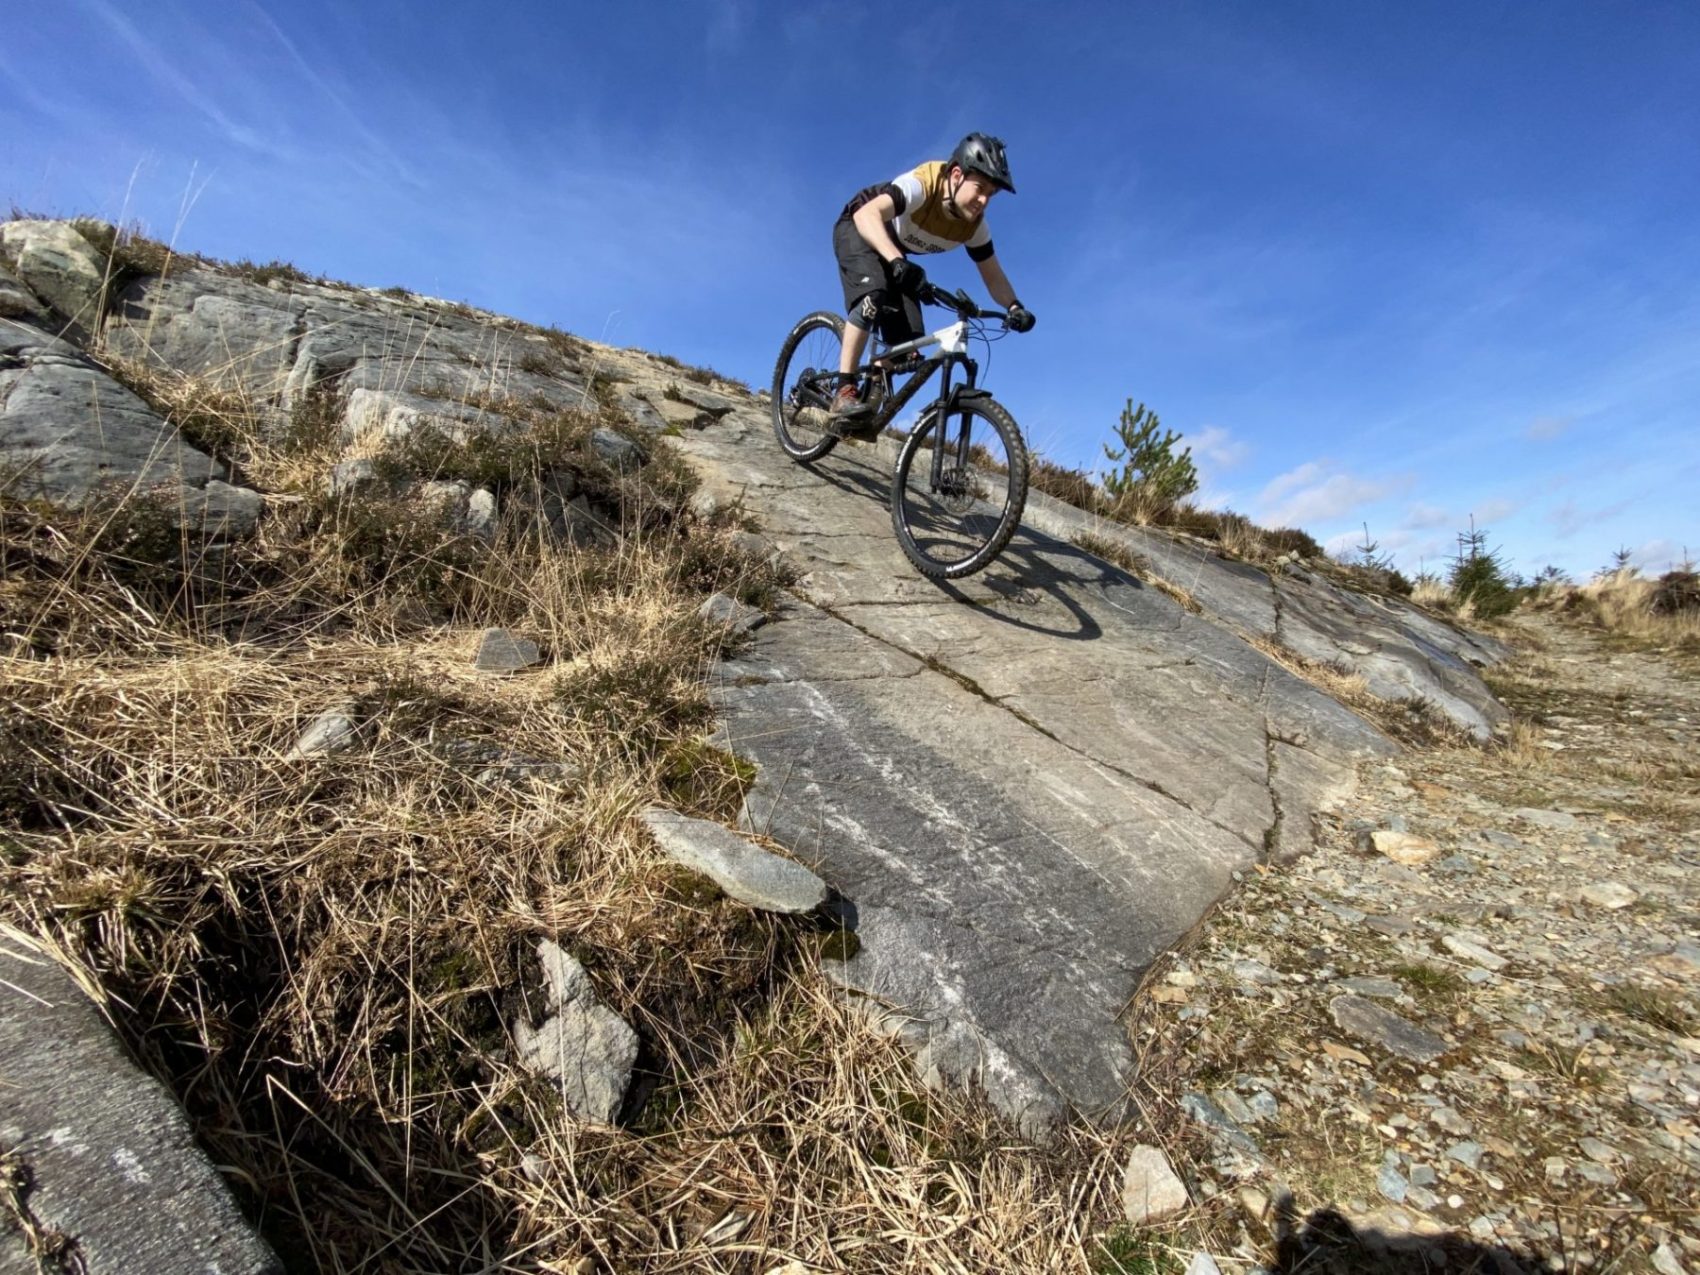 Will and Kate ride the Tarw Du black trail – Coed Y Brenin